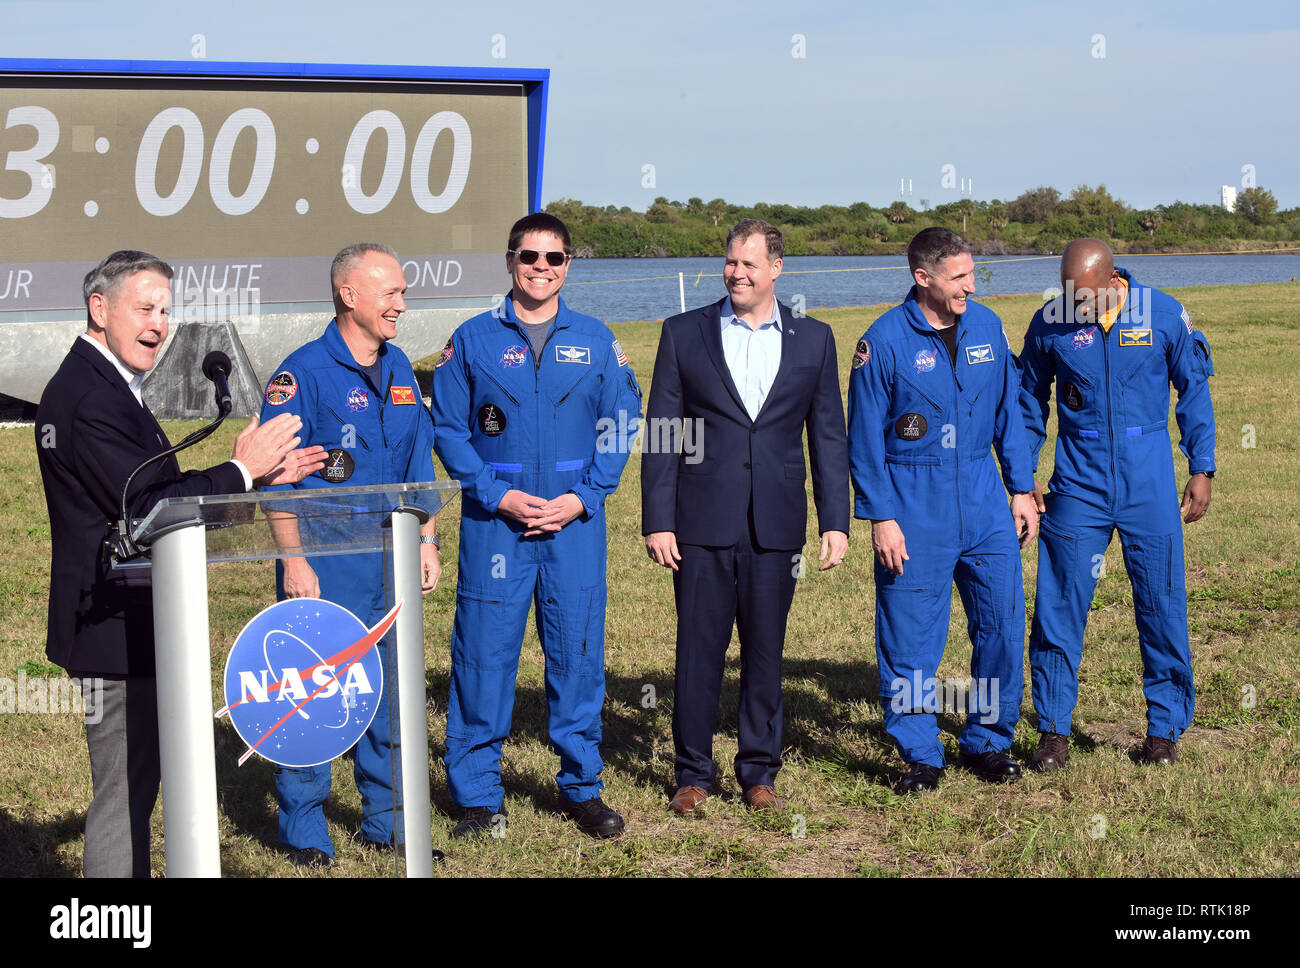 Kennedy Space Center, Florida, USA. 01st Mar, 2019. Kennedy Space Center Director Bob Cabana (L) introduces (from L) NASA Astronauts Doug Hurley and Bob Behnken, NASA Administrator Jim Bridenstine, and NASA Astronauts Mike Hopkins and Victor Glover at a press conference at the Kennedy Space Center in Florida on March 1, 2019 prior to the launch of a SpaceX Falcon 9 rocket carrying the unmanned Crew Dragon capsule. The rocket is set to lift off from Pad 39A at the Kennedy Space Center on its first flight, Demo-1, on March 2 at 2:49 a.m.EST. Credit: Paul Hennessy/Alamy Live News Stock Photo